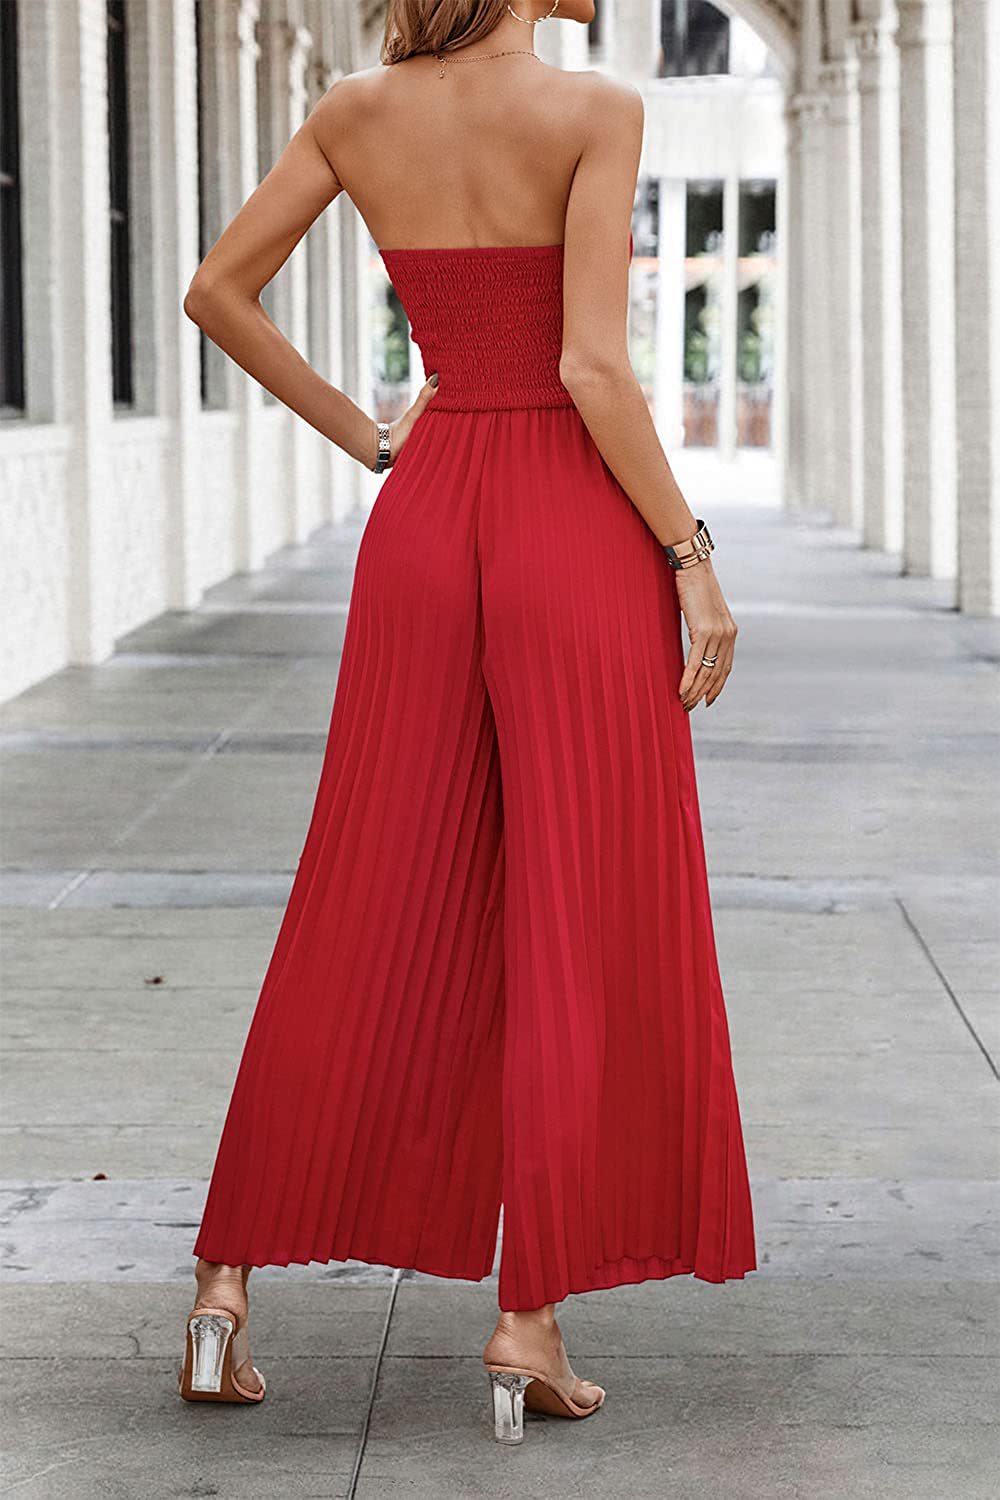 Women's Summer Tube Backless Pleated Wide-leg Trousers Pants